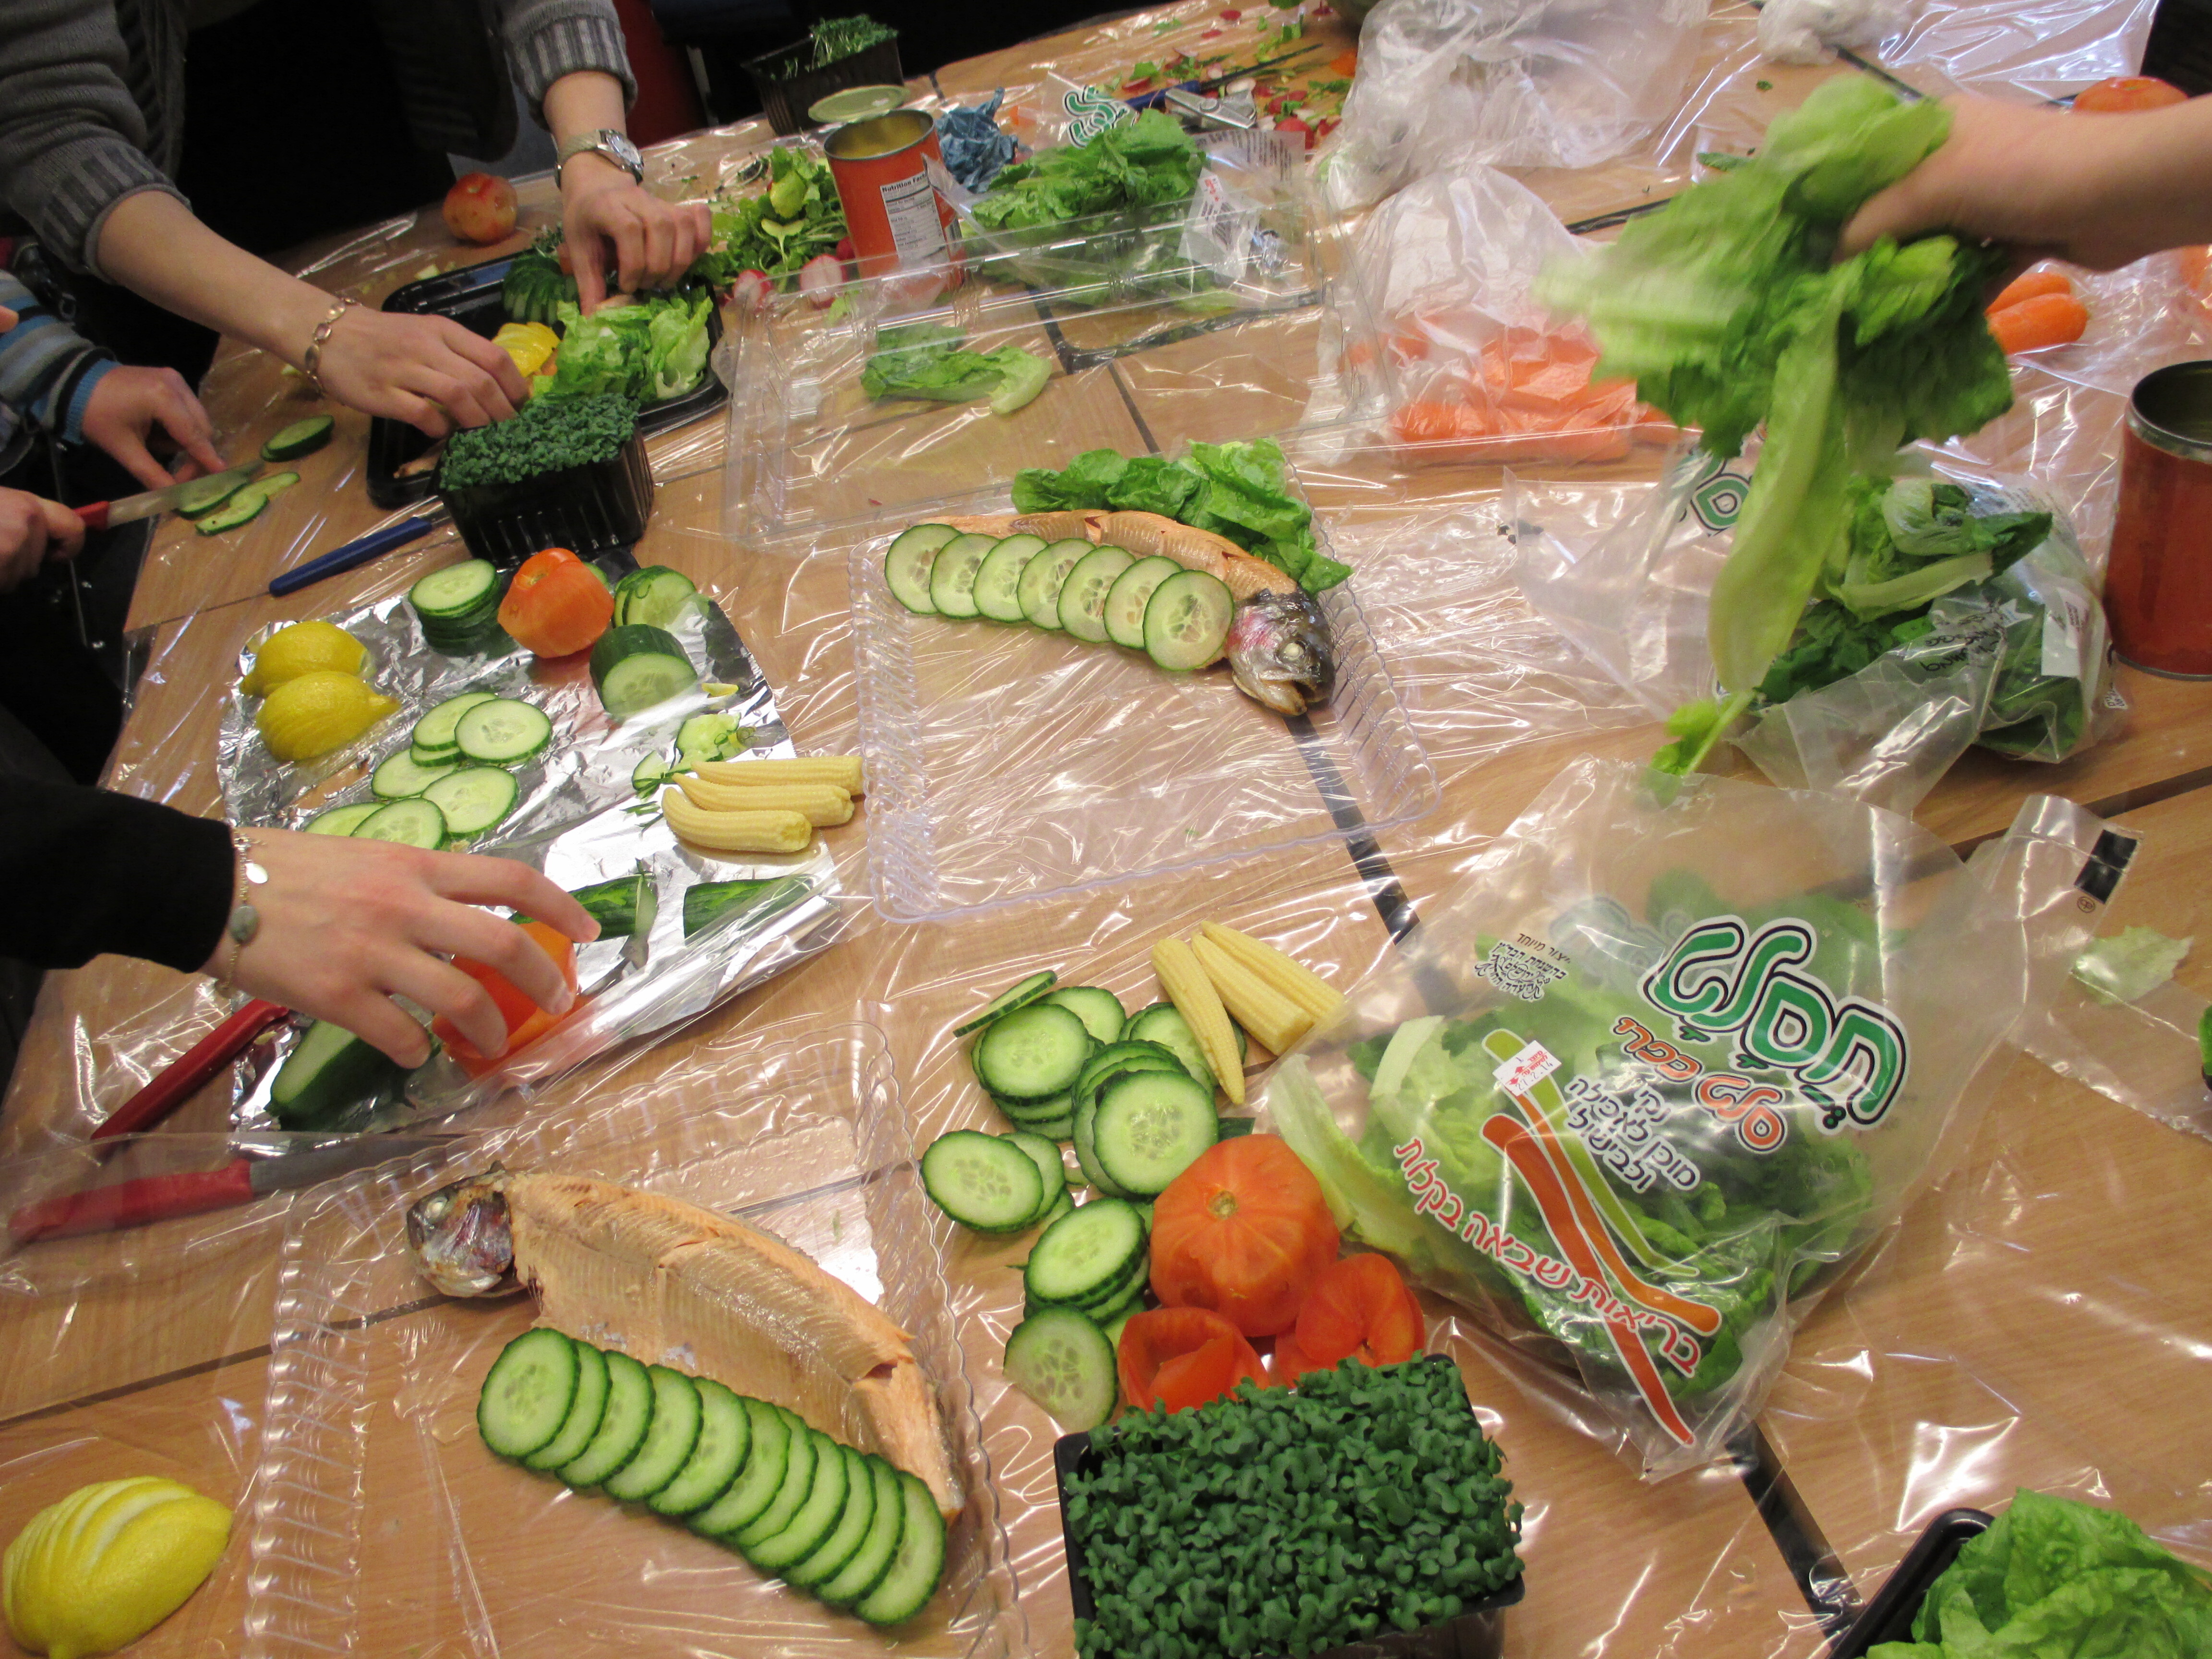 A table is covered with plastic sandwich bags and chopped salad ingredients. Some young girls' hands are in shot chopping the vegetables and putting them into bags.